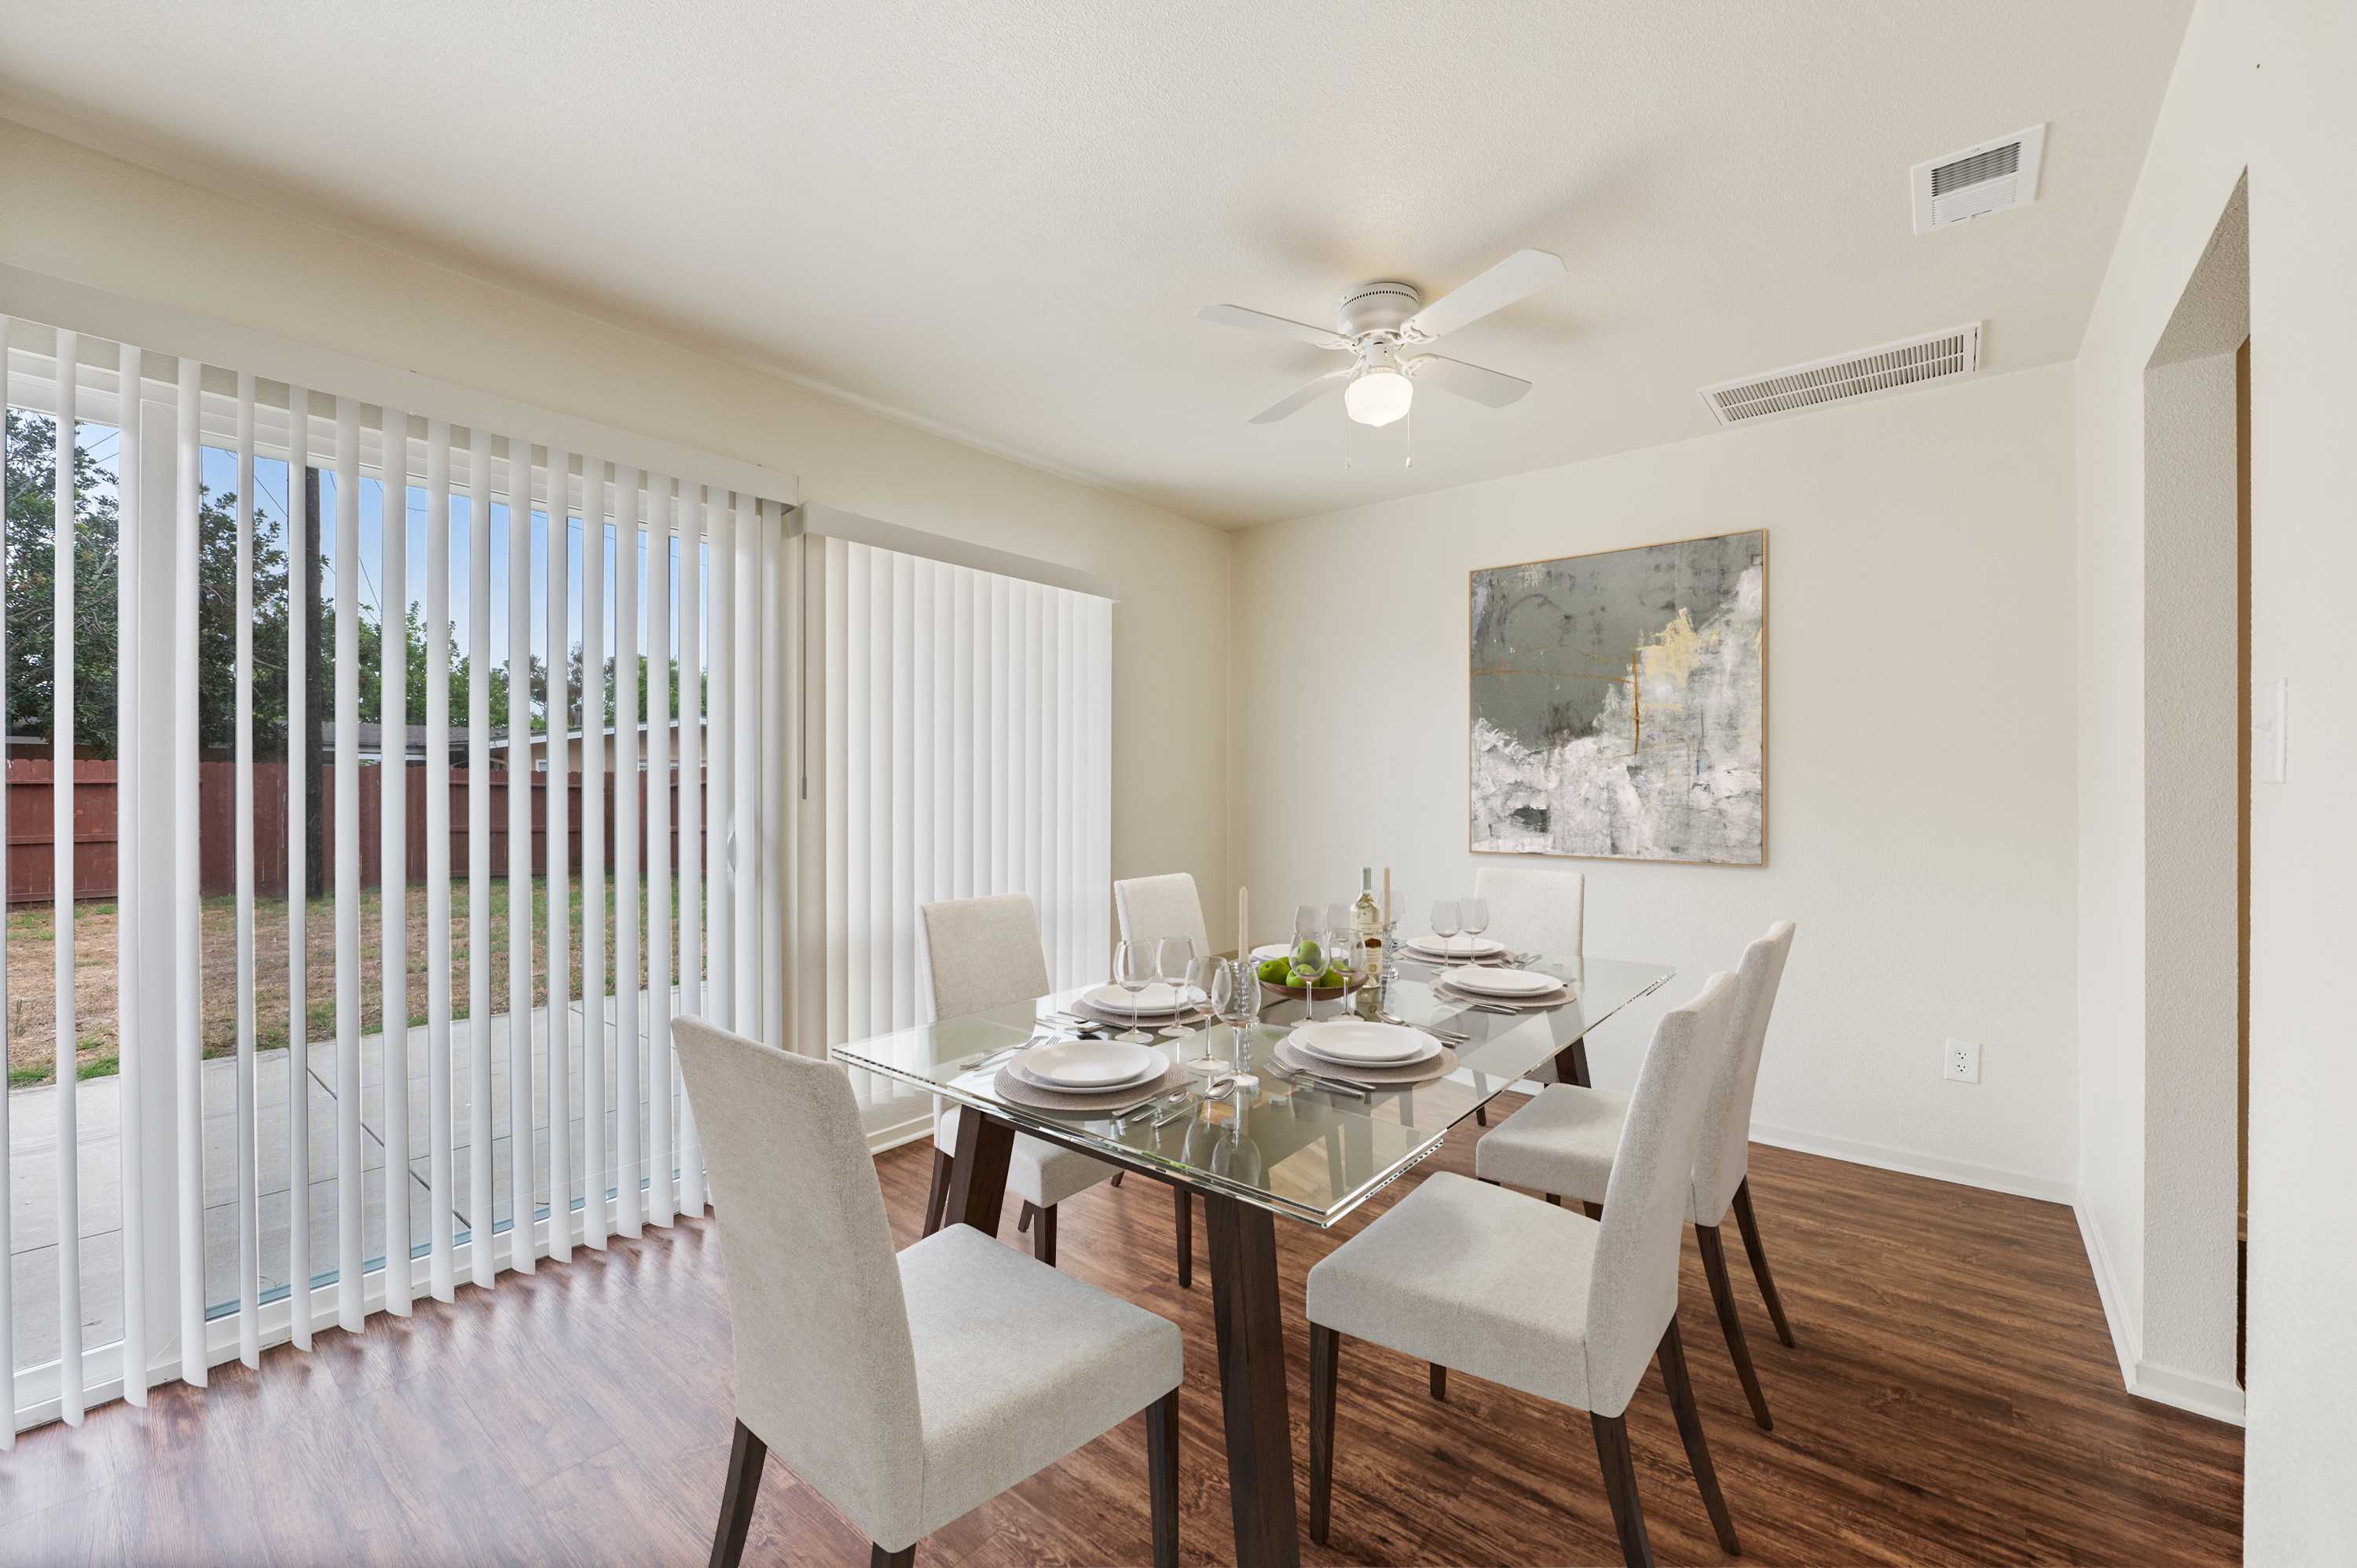 A dining room with wood floors and large windows at Coral Sea Cove in Port Hueneme, California